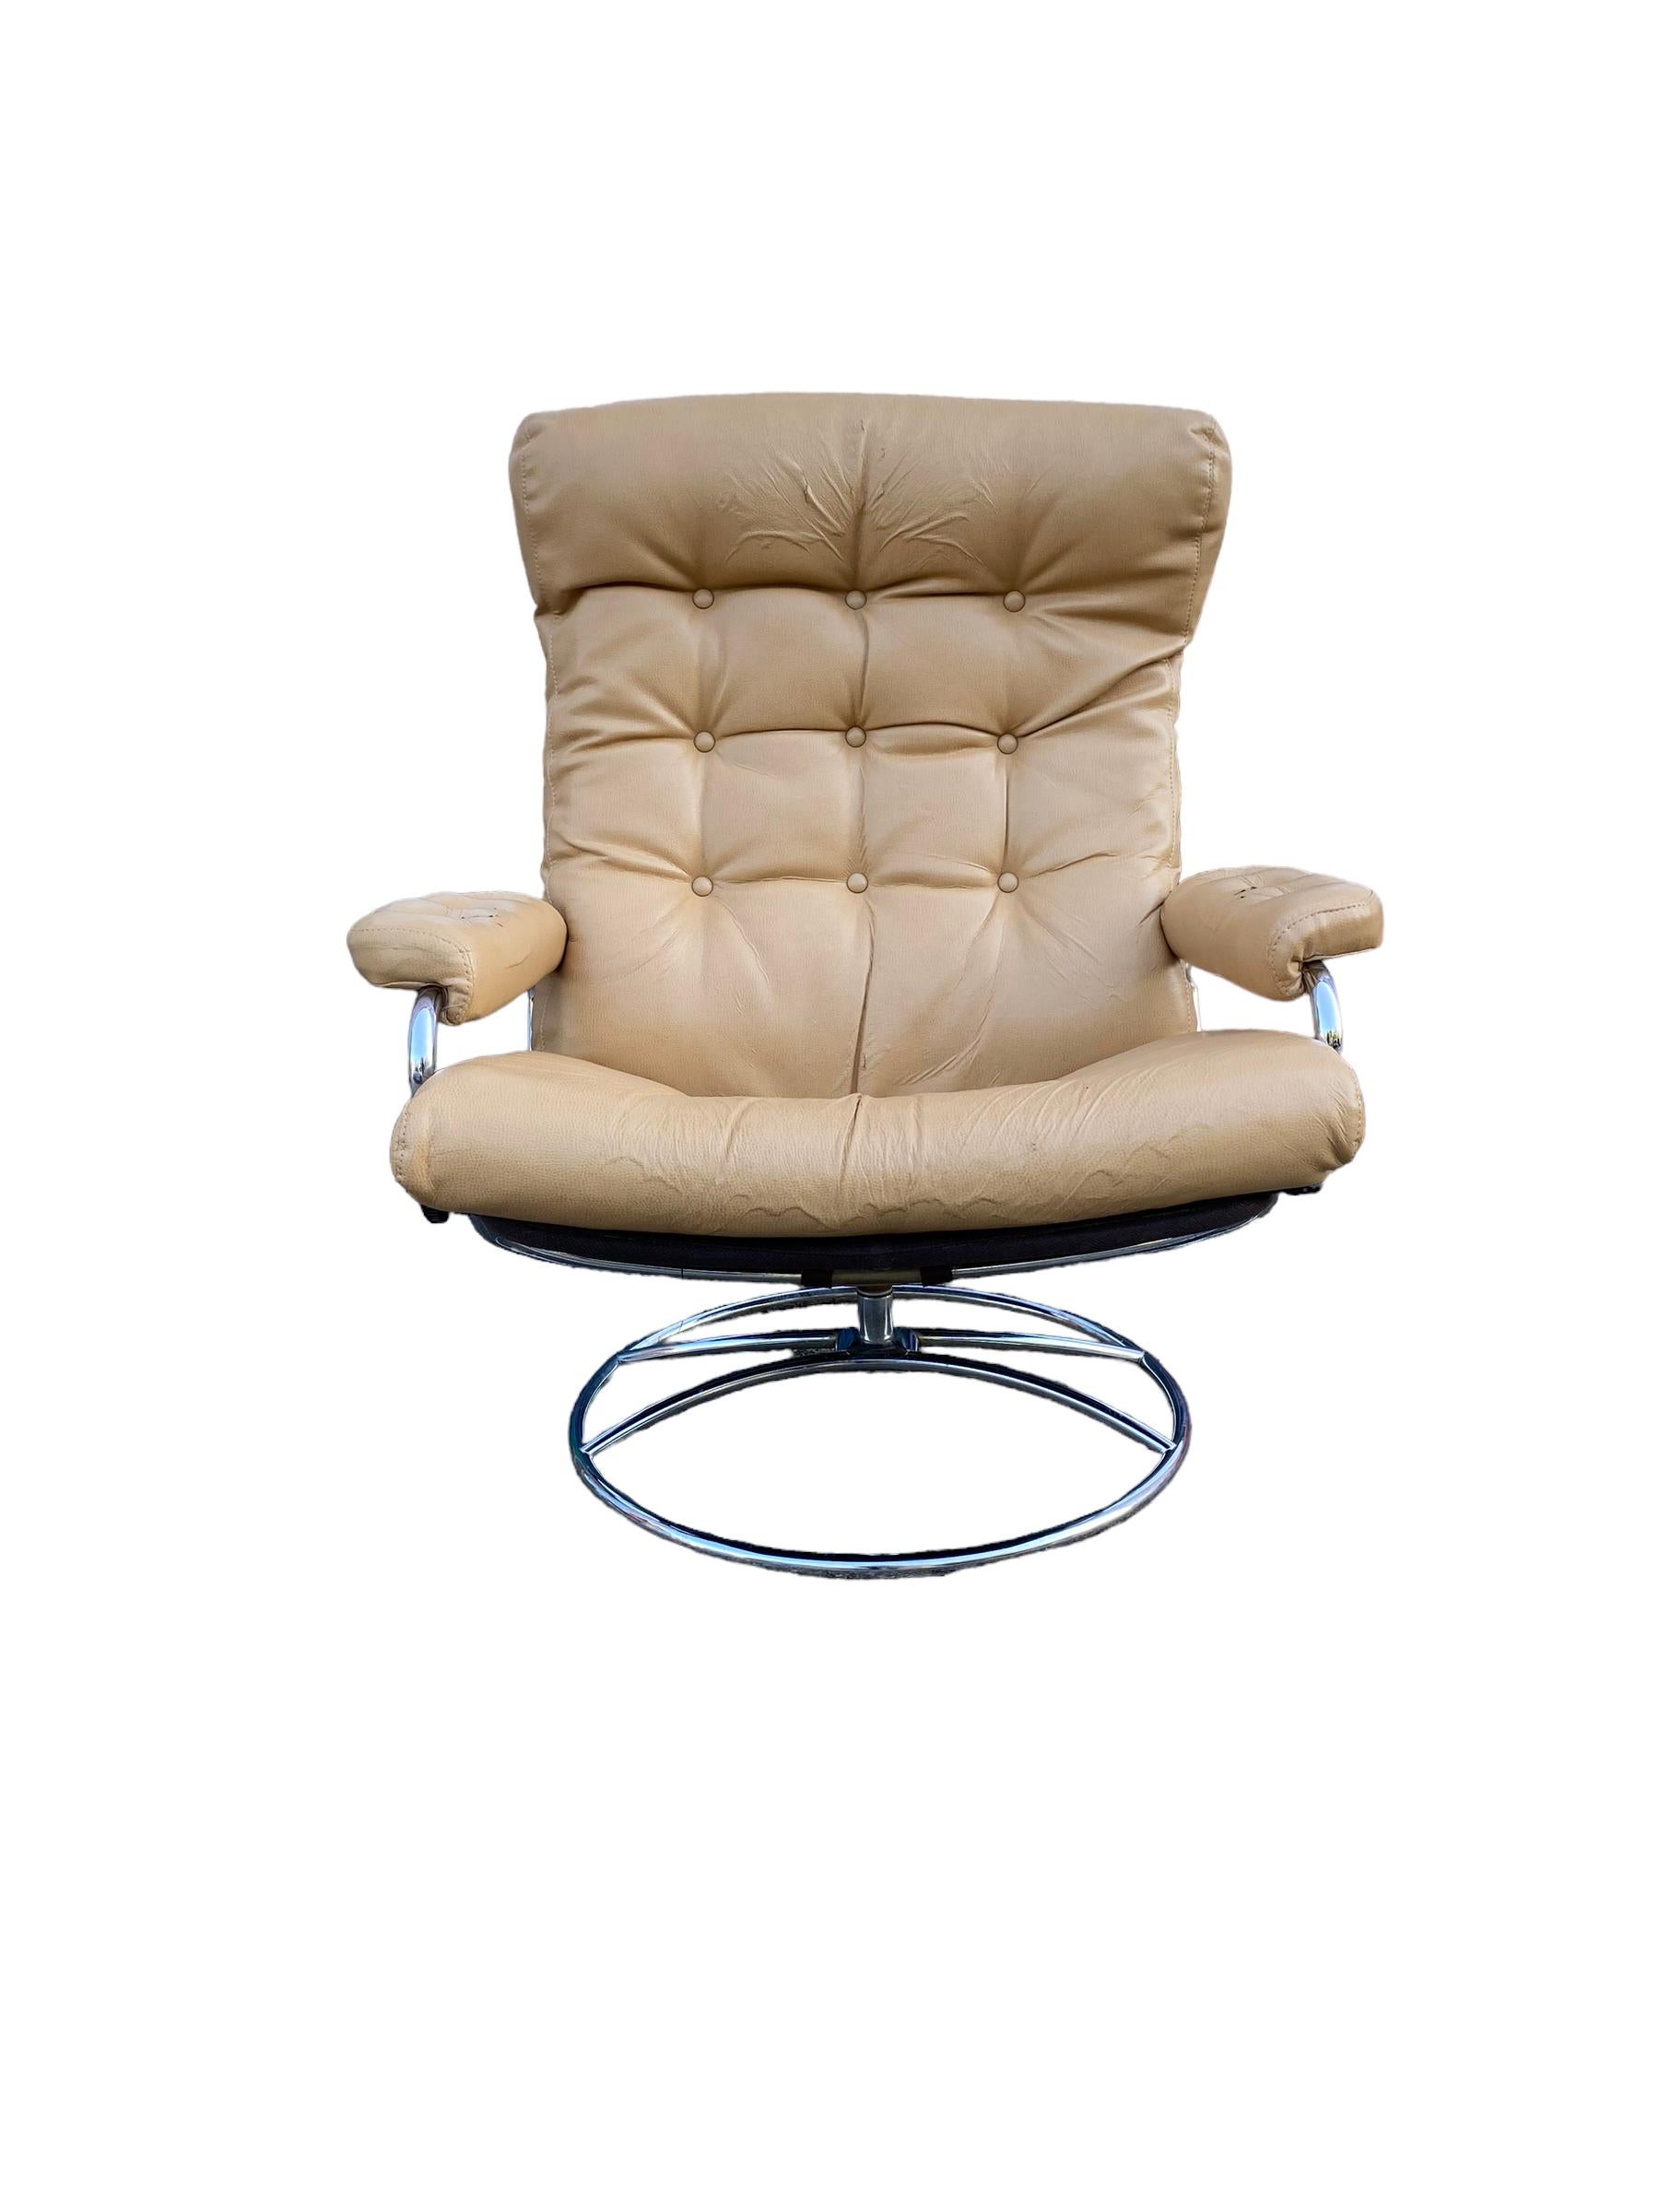 Ekornes Stressless Reclining Lounge Chair and Ottoman For Sale 3